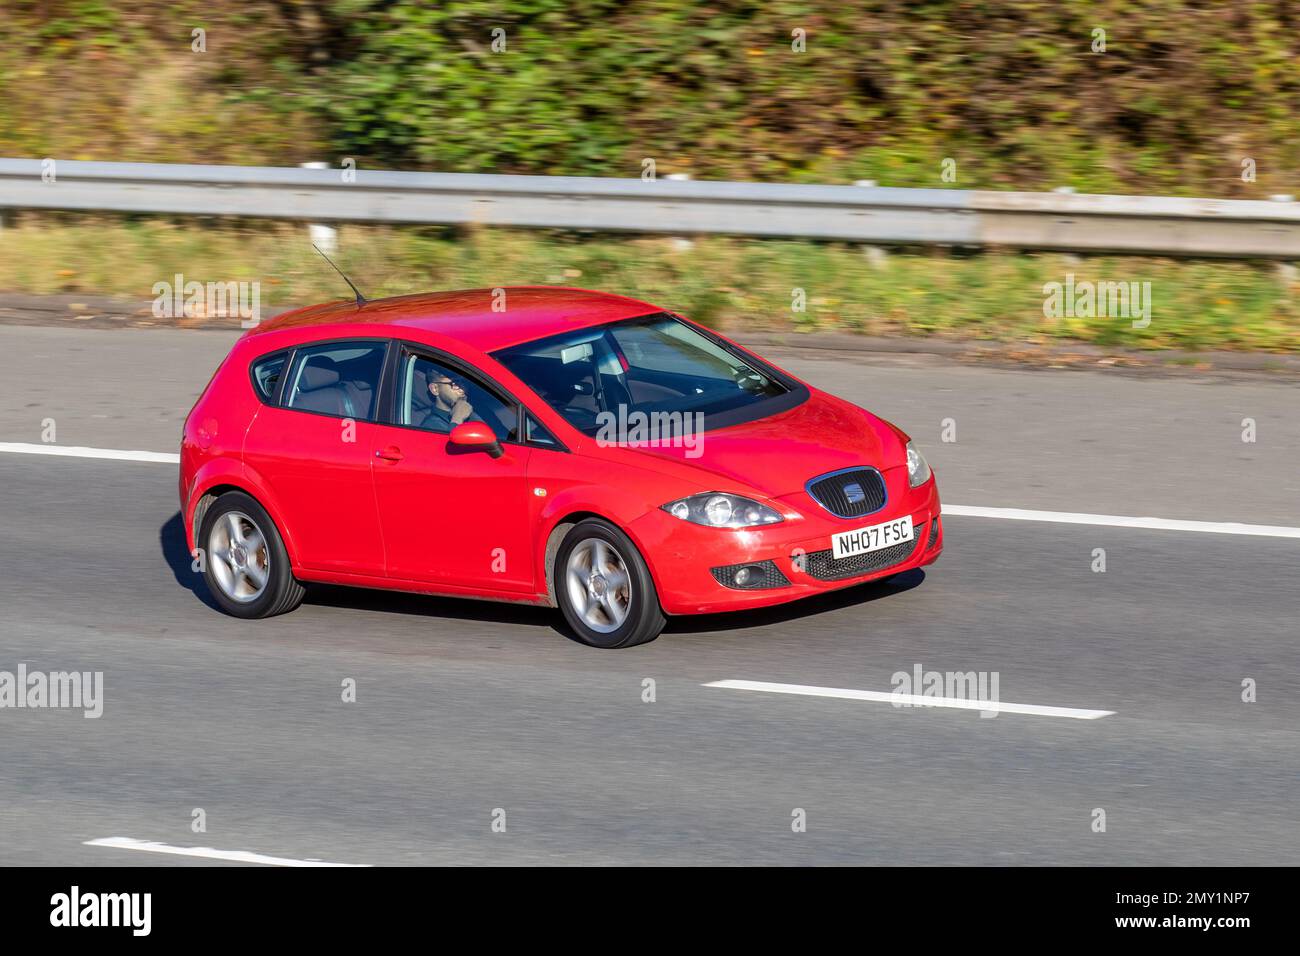 2002 (07) Red SEAT LEON. RDI STYLANCE 1896cc 5 speed manual; travelling on the M61 motorway UK Stock Photo